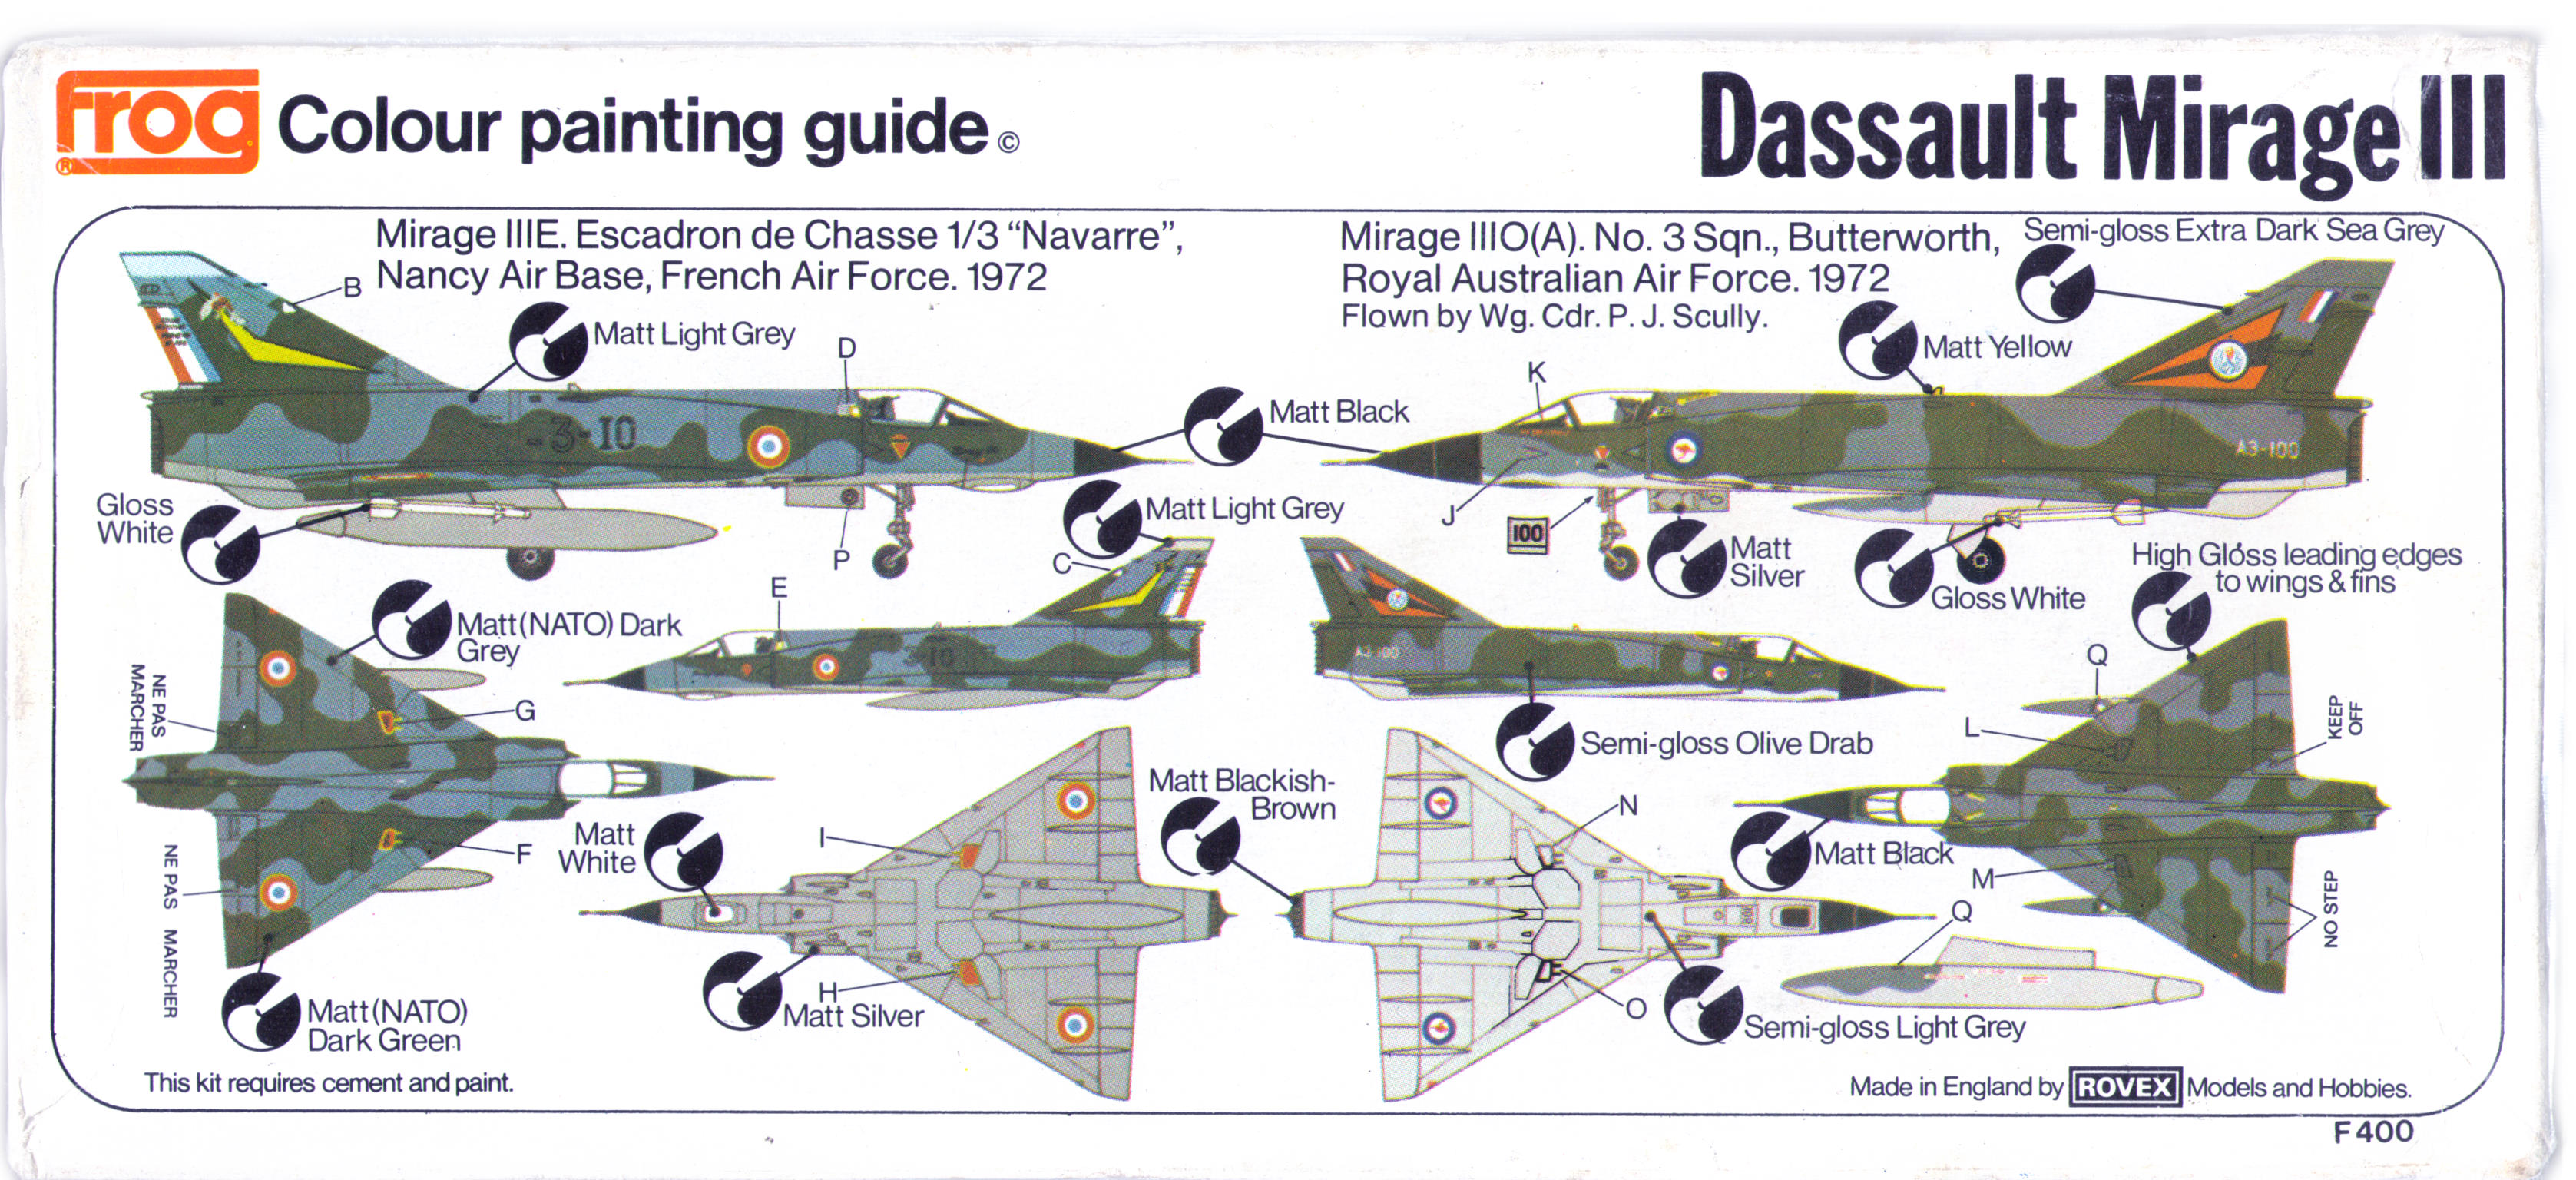 Colour painting guide FROG F400 Mirage IIIE/O Interceptor / Ground Attack, 1975